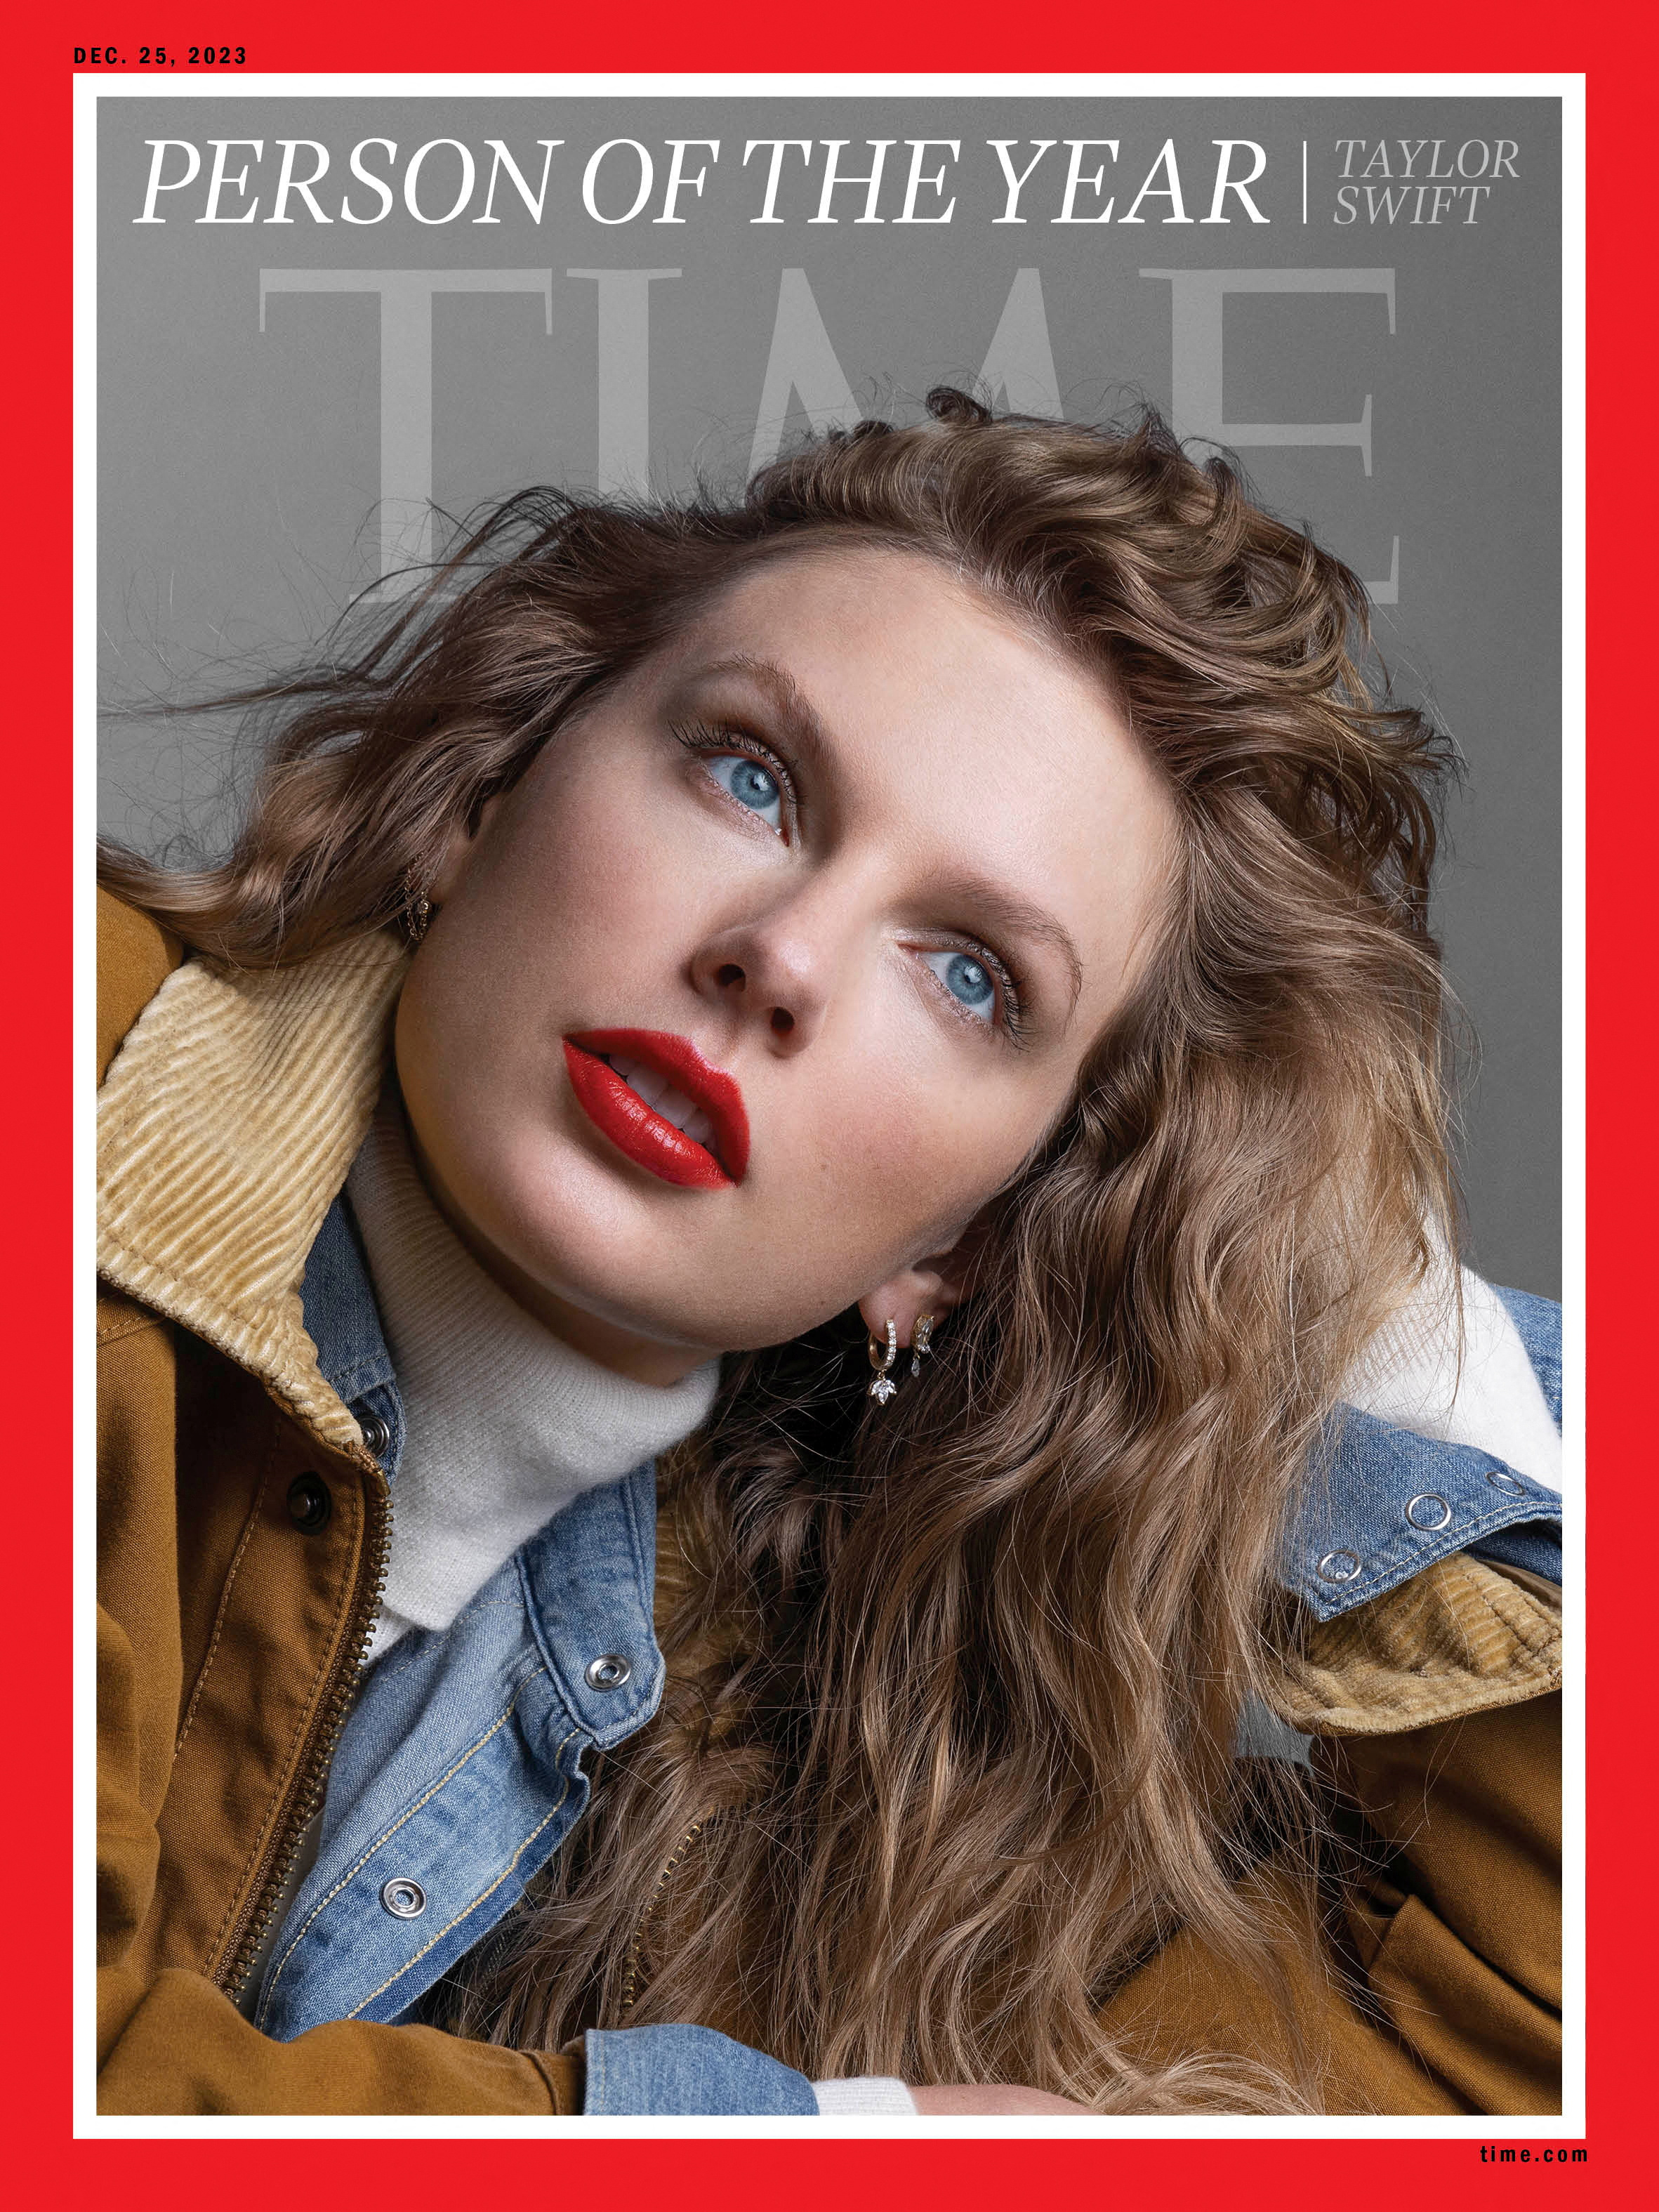 Taylor Swift named Time's 'Person of the Year,' capping her record